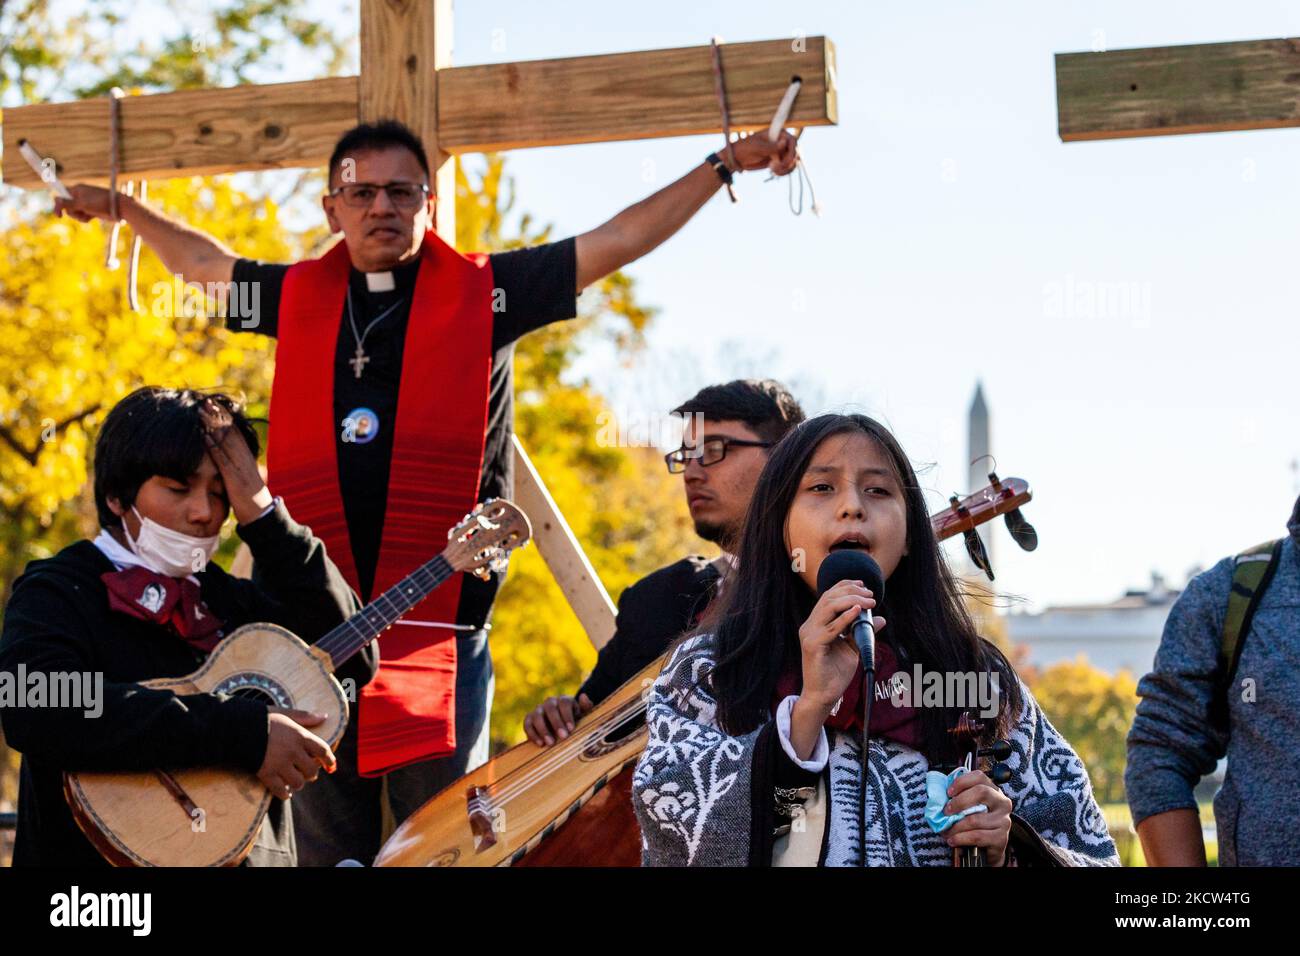 Immigration activist Father Jose Landaverde hangs on a wooden cross during a direct action by the National TPS Alliance at the White House. Activists are hanging on crosses for 8 hours to symbolize the sacrifice immigrants make to contribute to life in the US by long, hard work. A band of young people from a mariachi school plays in front of Father Landaverde. They are part of a rally celebrating Mexican President Andrés Manuel Lopez Obrador’s summit with President Joe Biden and Canadian Peime Minister Justin Trudeau, as well as demanding immigration reform. (Photo by Allison Bailey/NurPhoto) Stock Photo